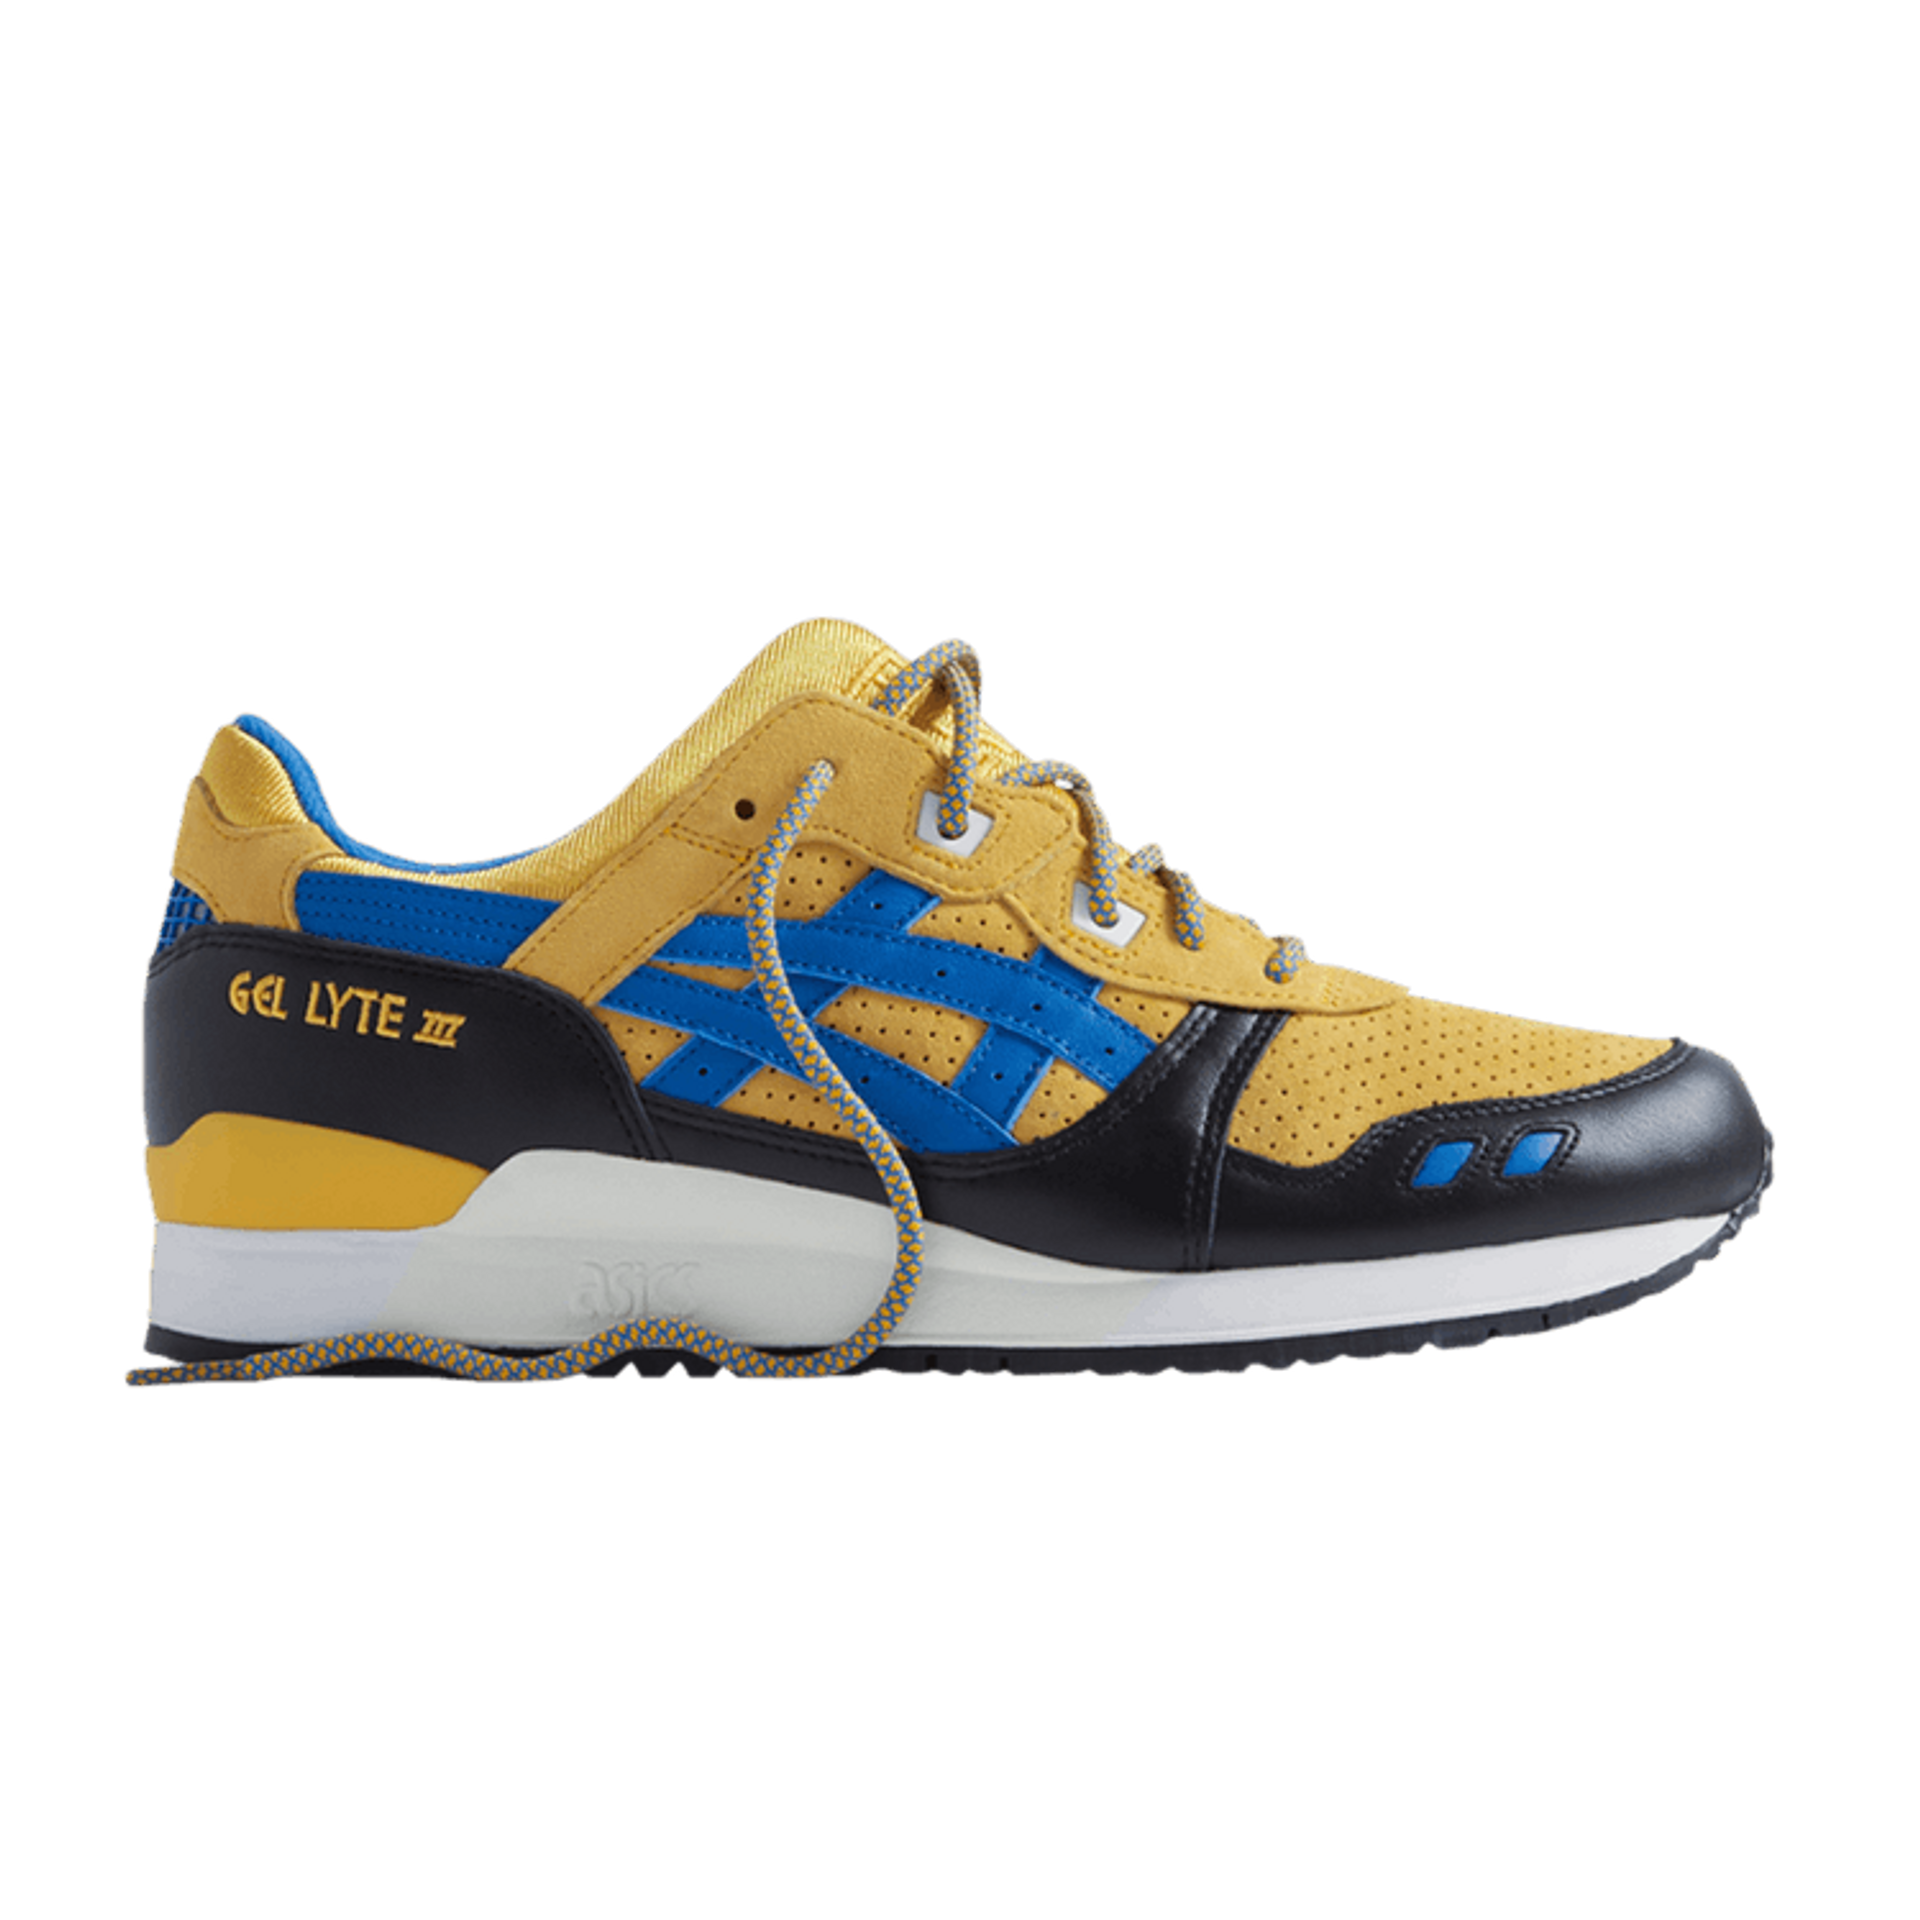 X-Men x Kith x ASICS Gel Lyte 3 '60th Anniversary - Wolverine 1975' (Trading Card Not Included)